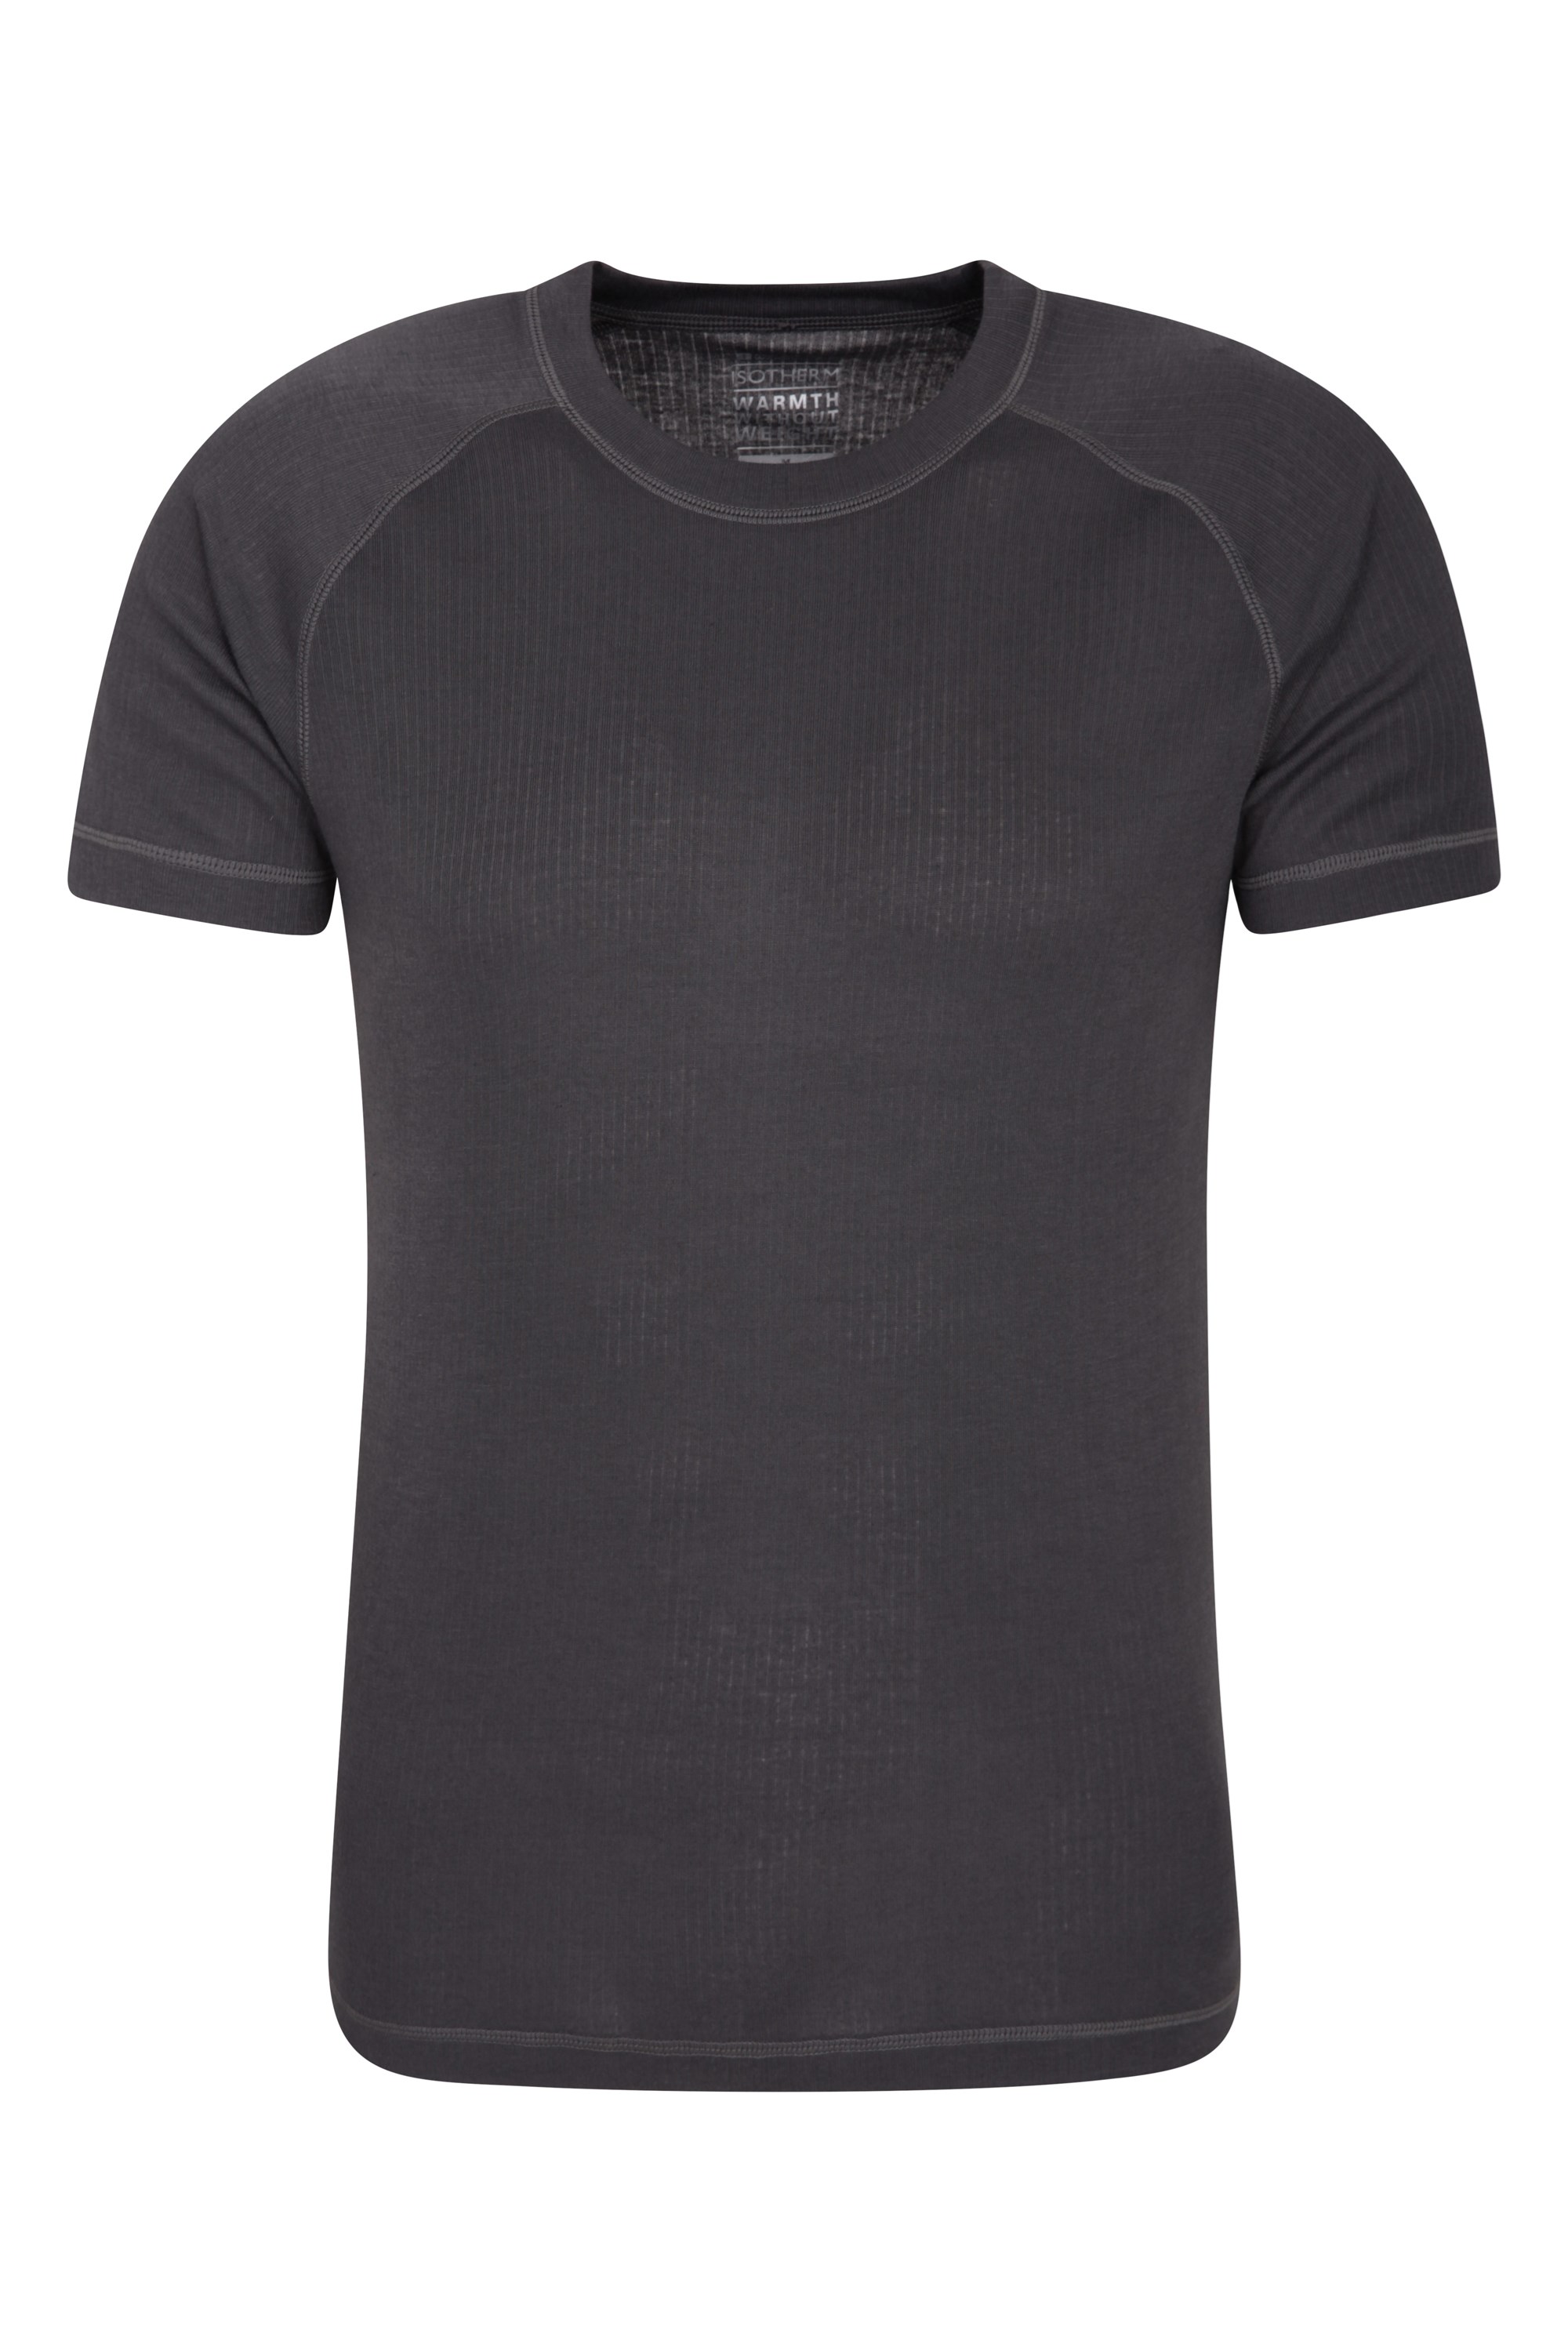 Talus Mens Short Sleeved Round Neck Top - Grey